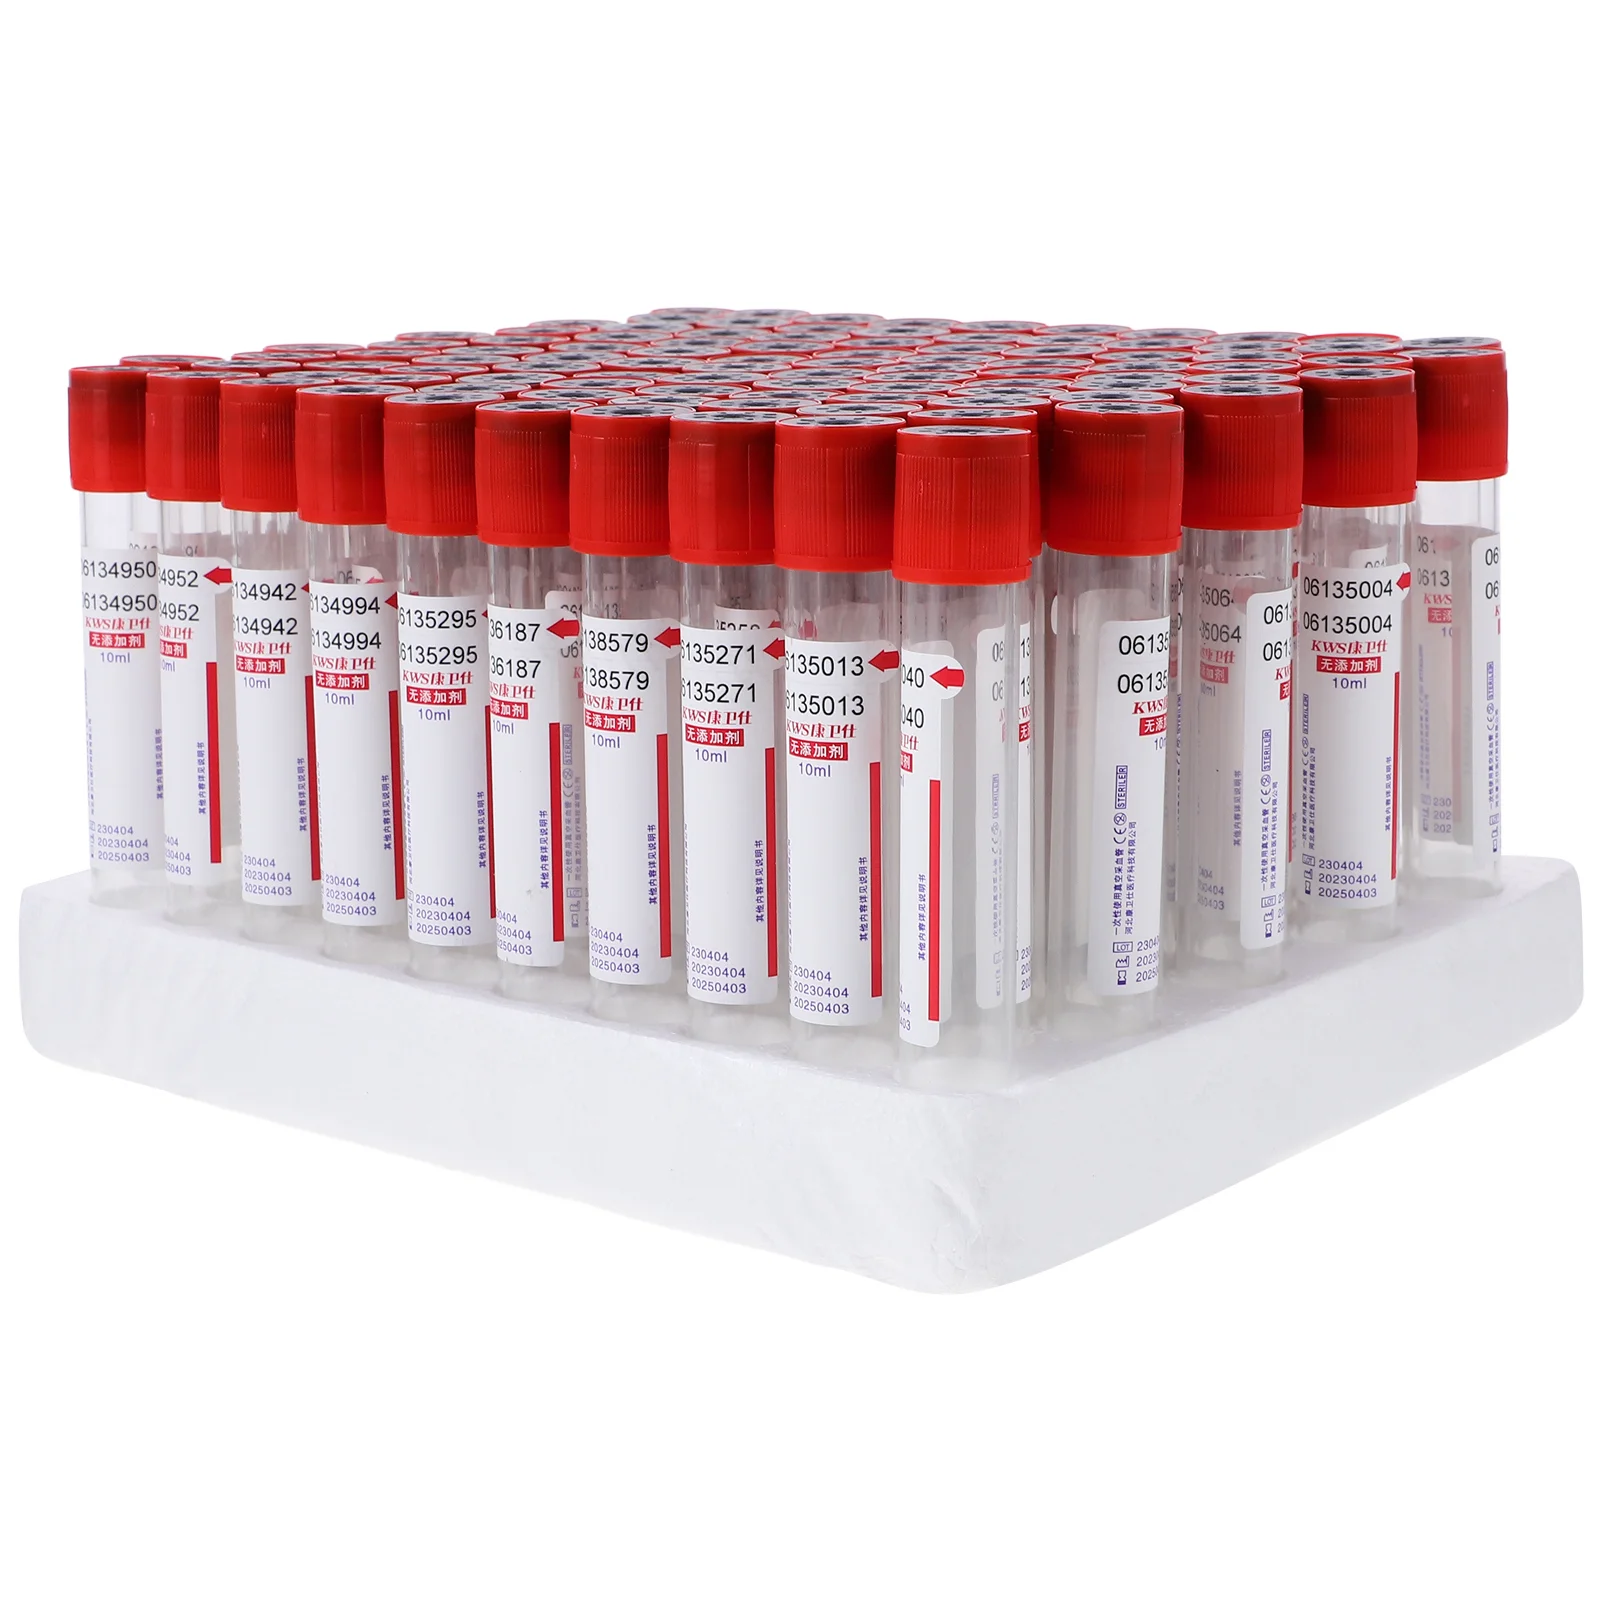 

100 Pcs 10ml Blood Collection Tube Test Tubes Lids Collecting Disposable Red Vacuum Glue Head Glass Negative Pressure Collector